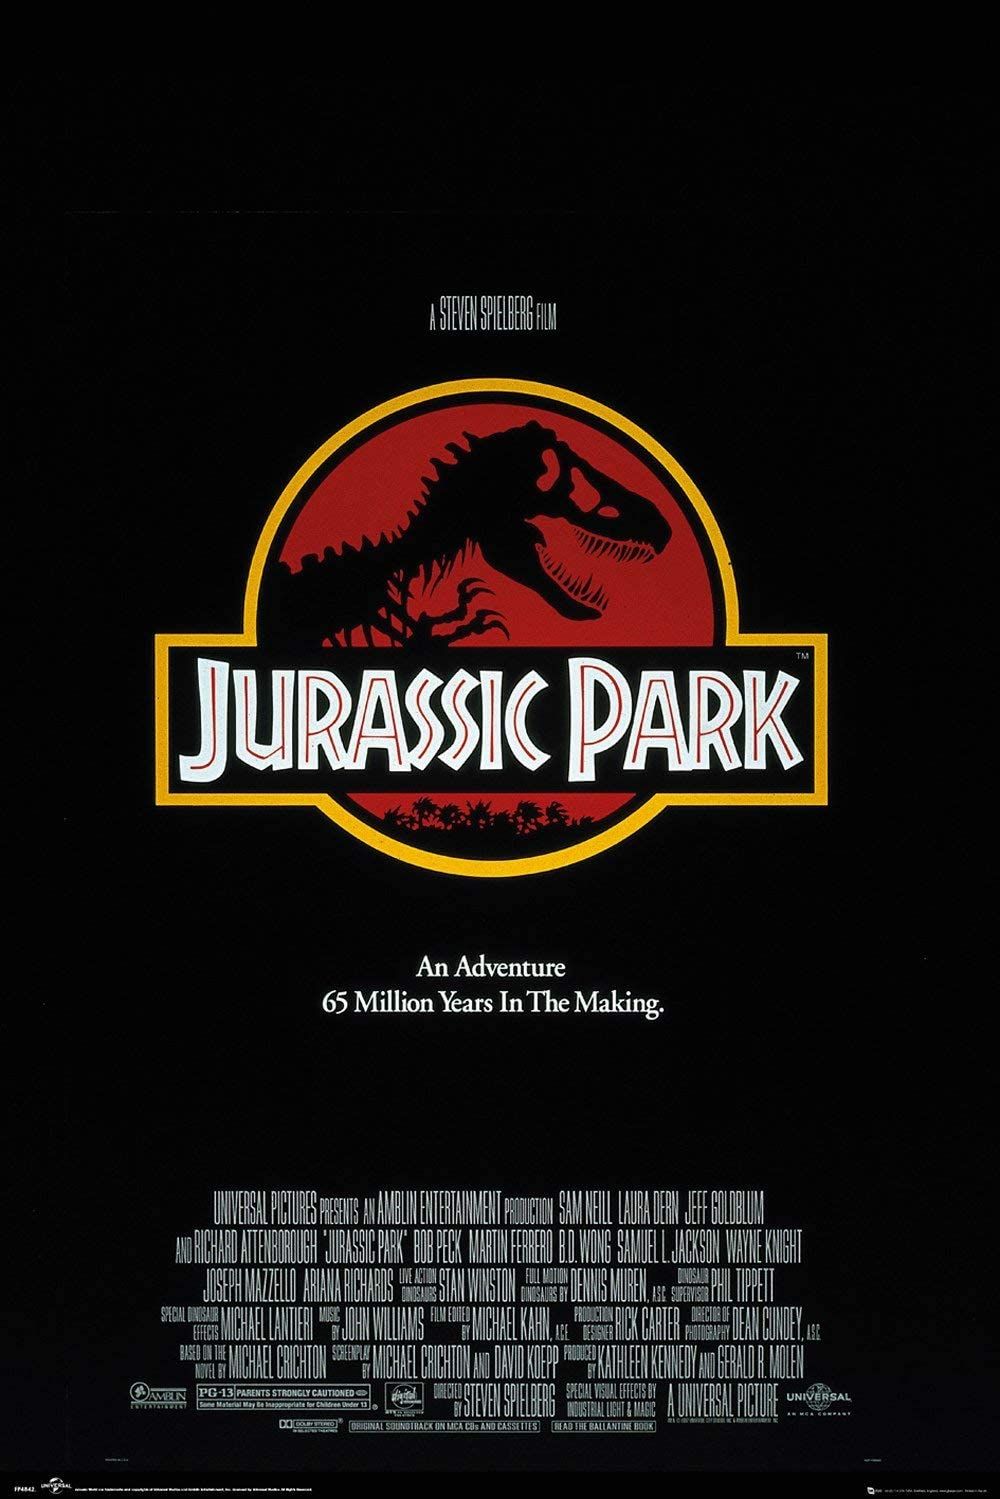 The Jurassic Park movie poster with a simple black background